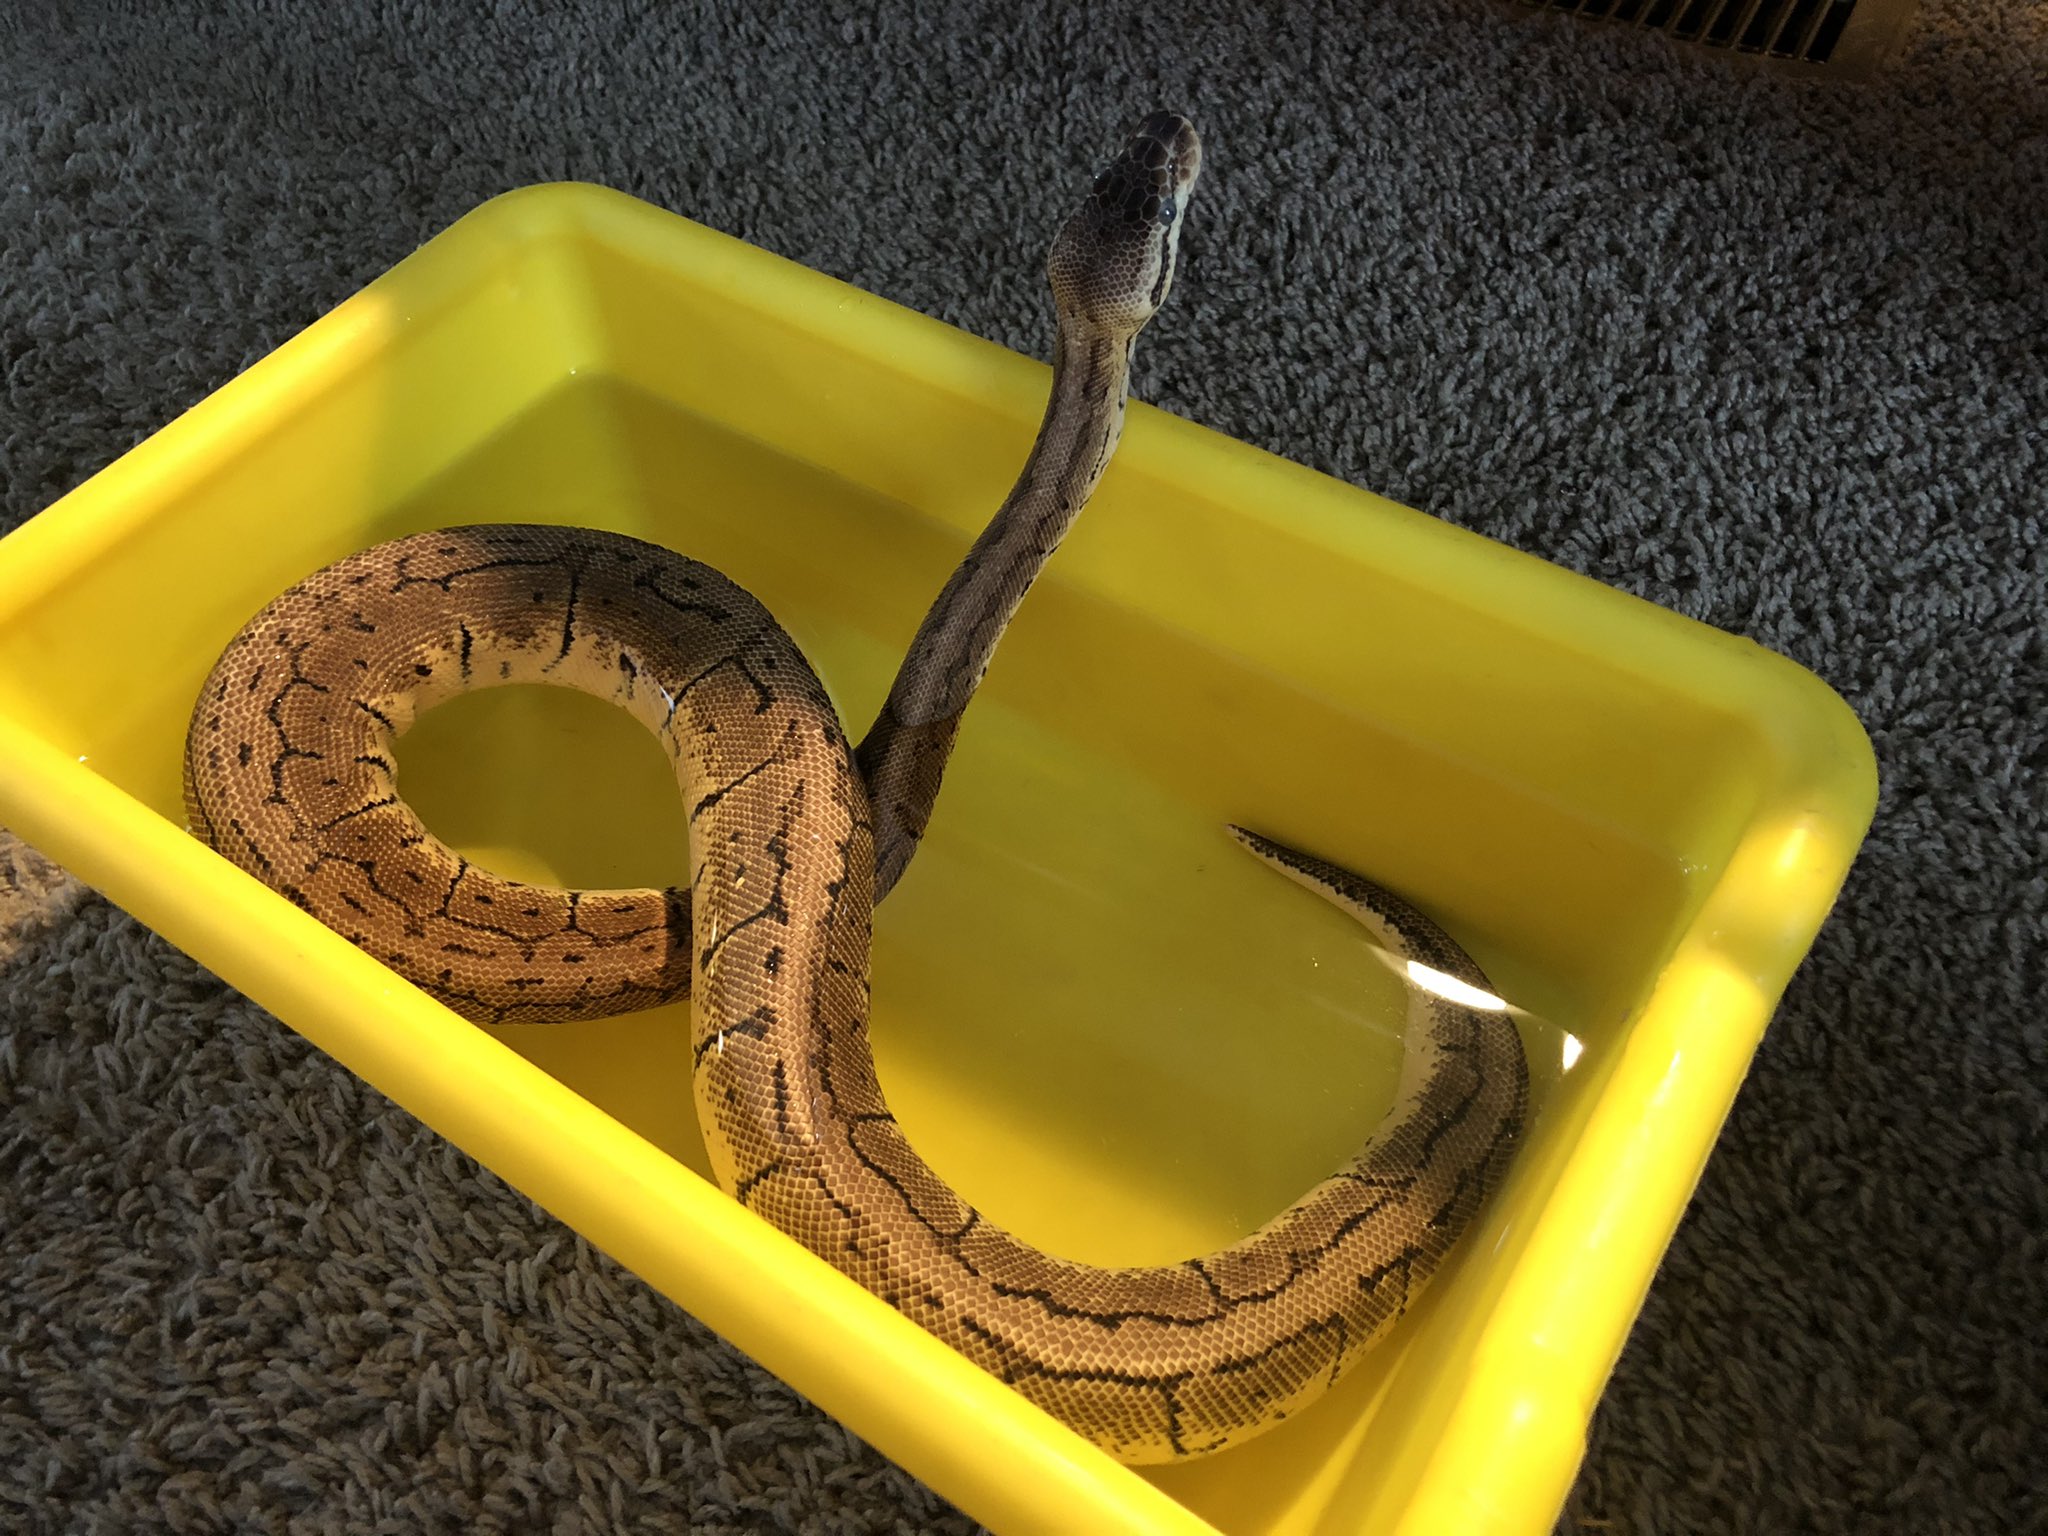 She likes her warm baths 💖 Time for her to shed! 🐍 🛀 https://t.co/9kaSgQmJV3